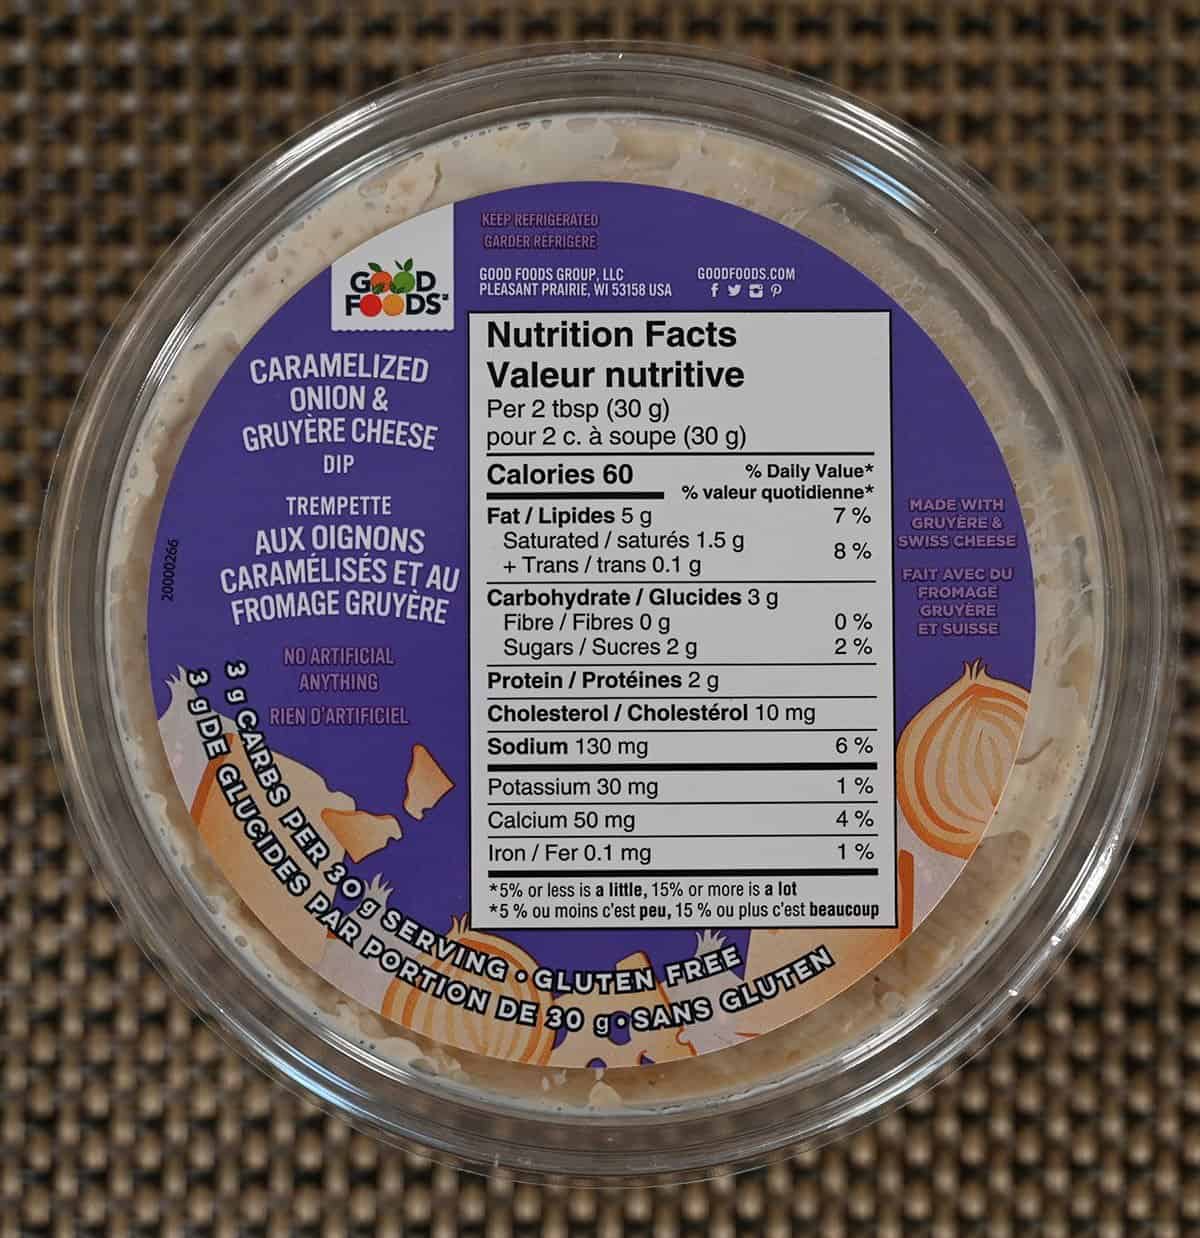 Image of the Costco Good Foods Caramelized Onion & Gruyere Cheese Dip top of the container label. 